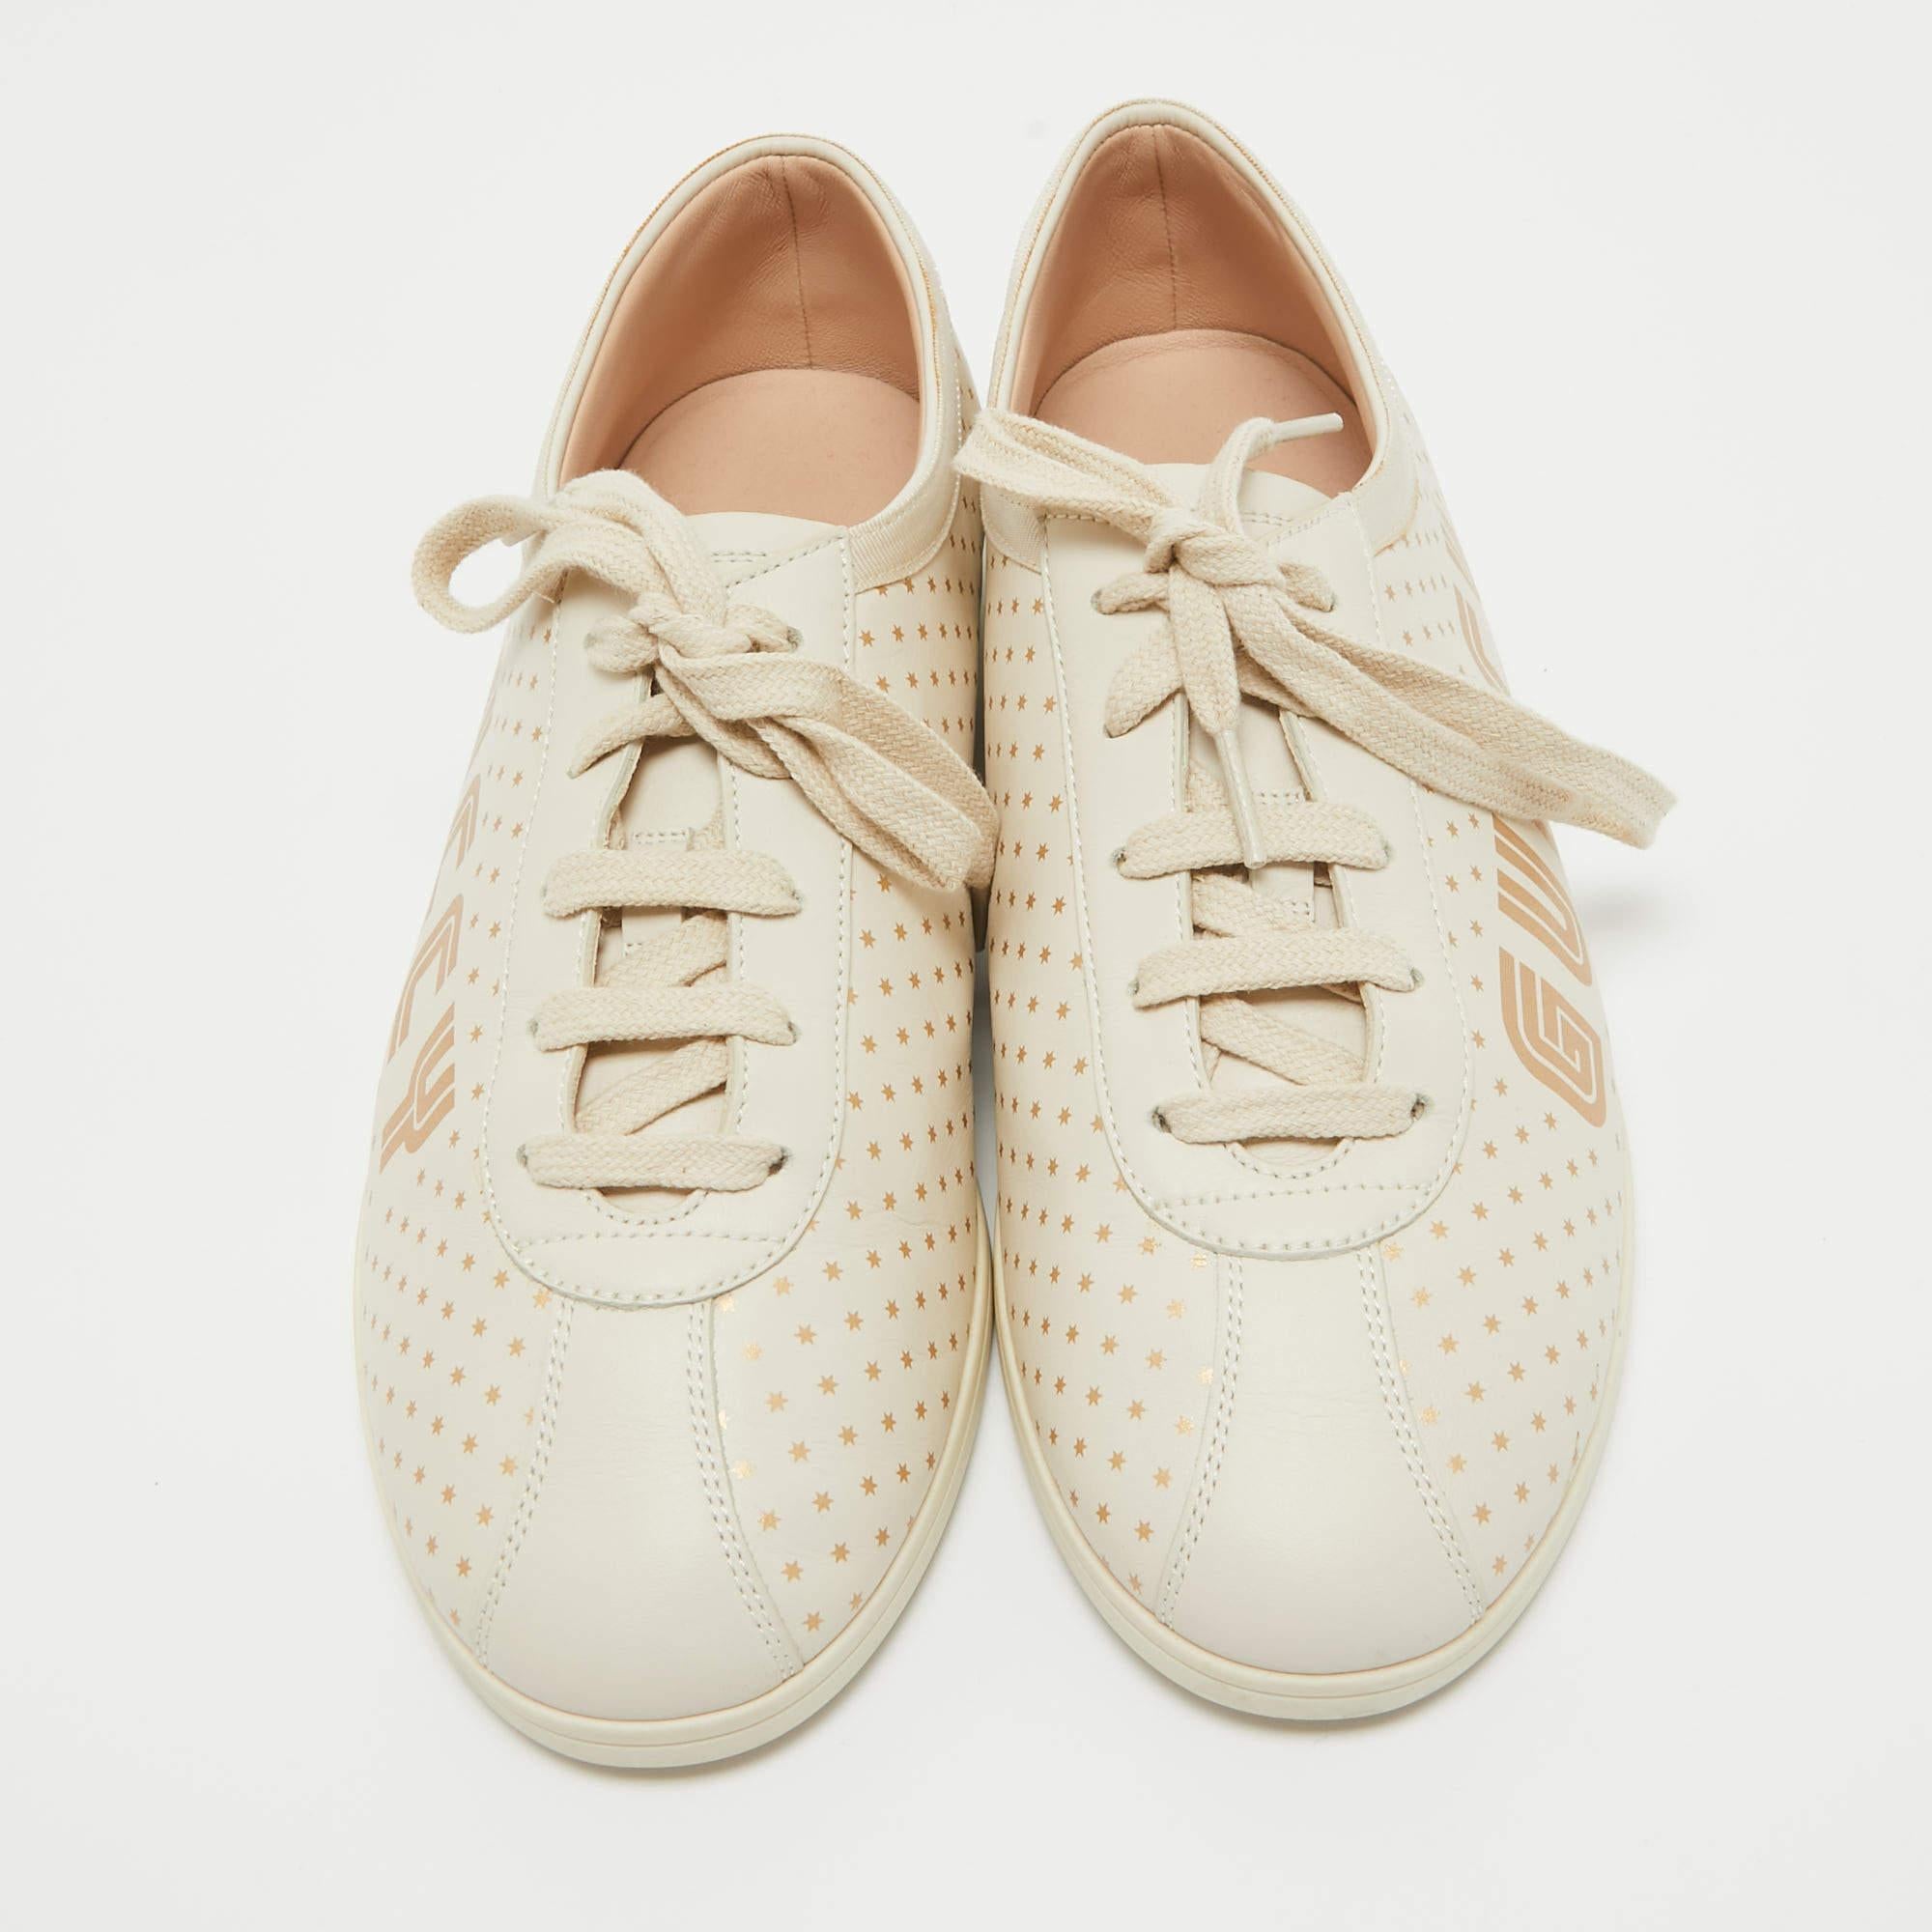 Add a statement appeal to your outfit with these sneakers. Made from premium materials, they feature lace-up vamps and relaxing footbeds. The durable sole of this pair aims to provide you with everyday ease.

